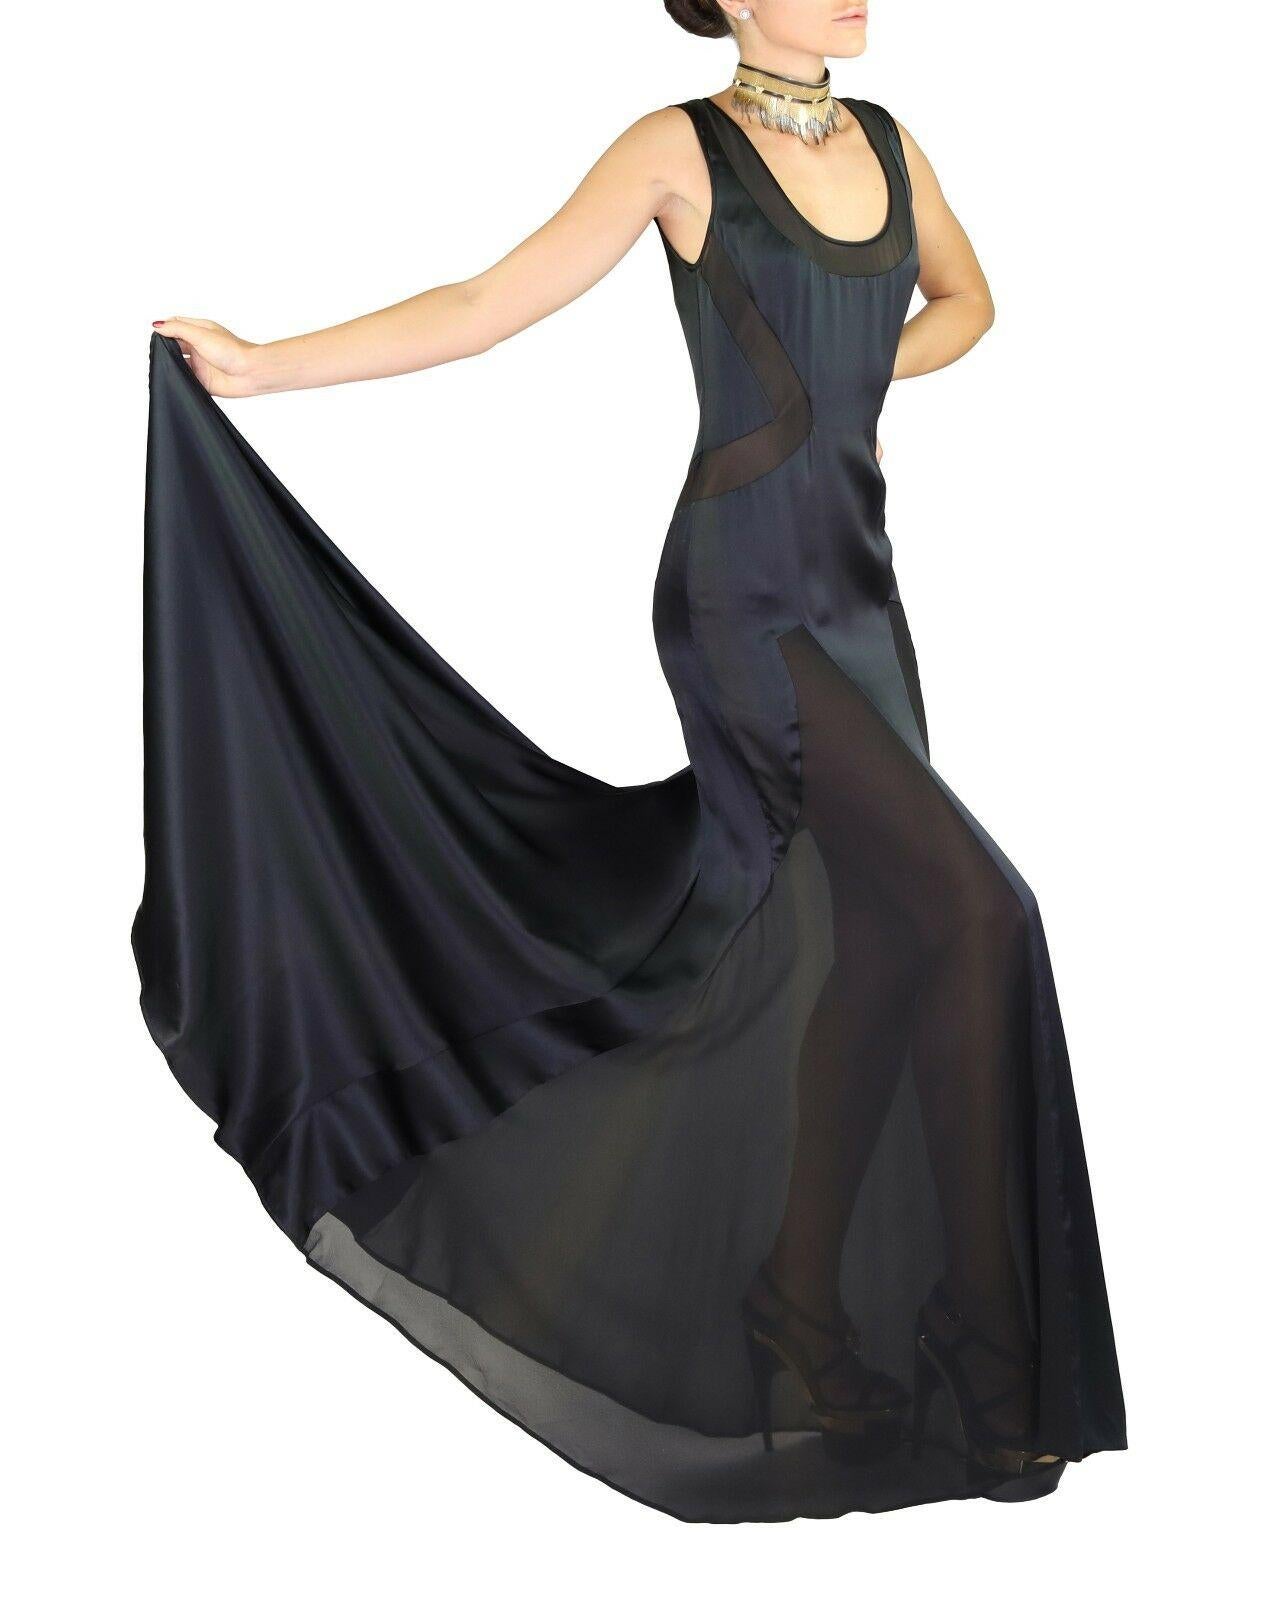 VERSACE

Black Silk gown with Transparent inserts

Train at the back

Content: 100% Silk

Size 40 or US 4

Armpit to armpit: up to 18